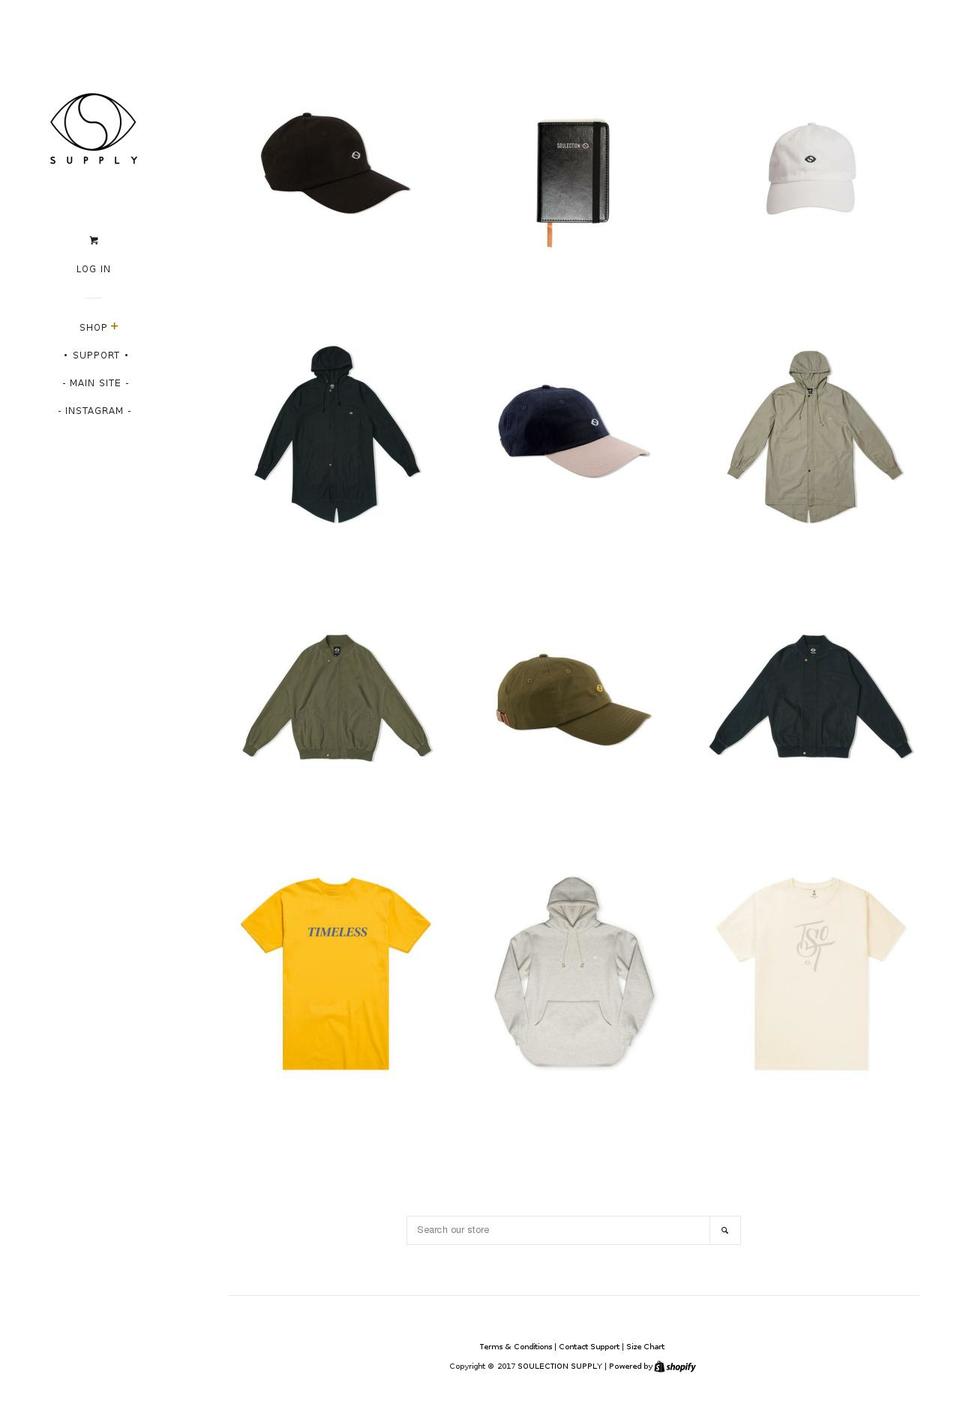 soulection.supply shopify website screenshot